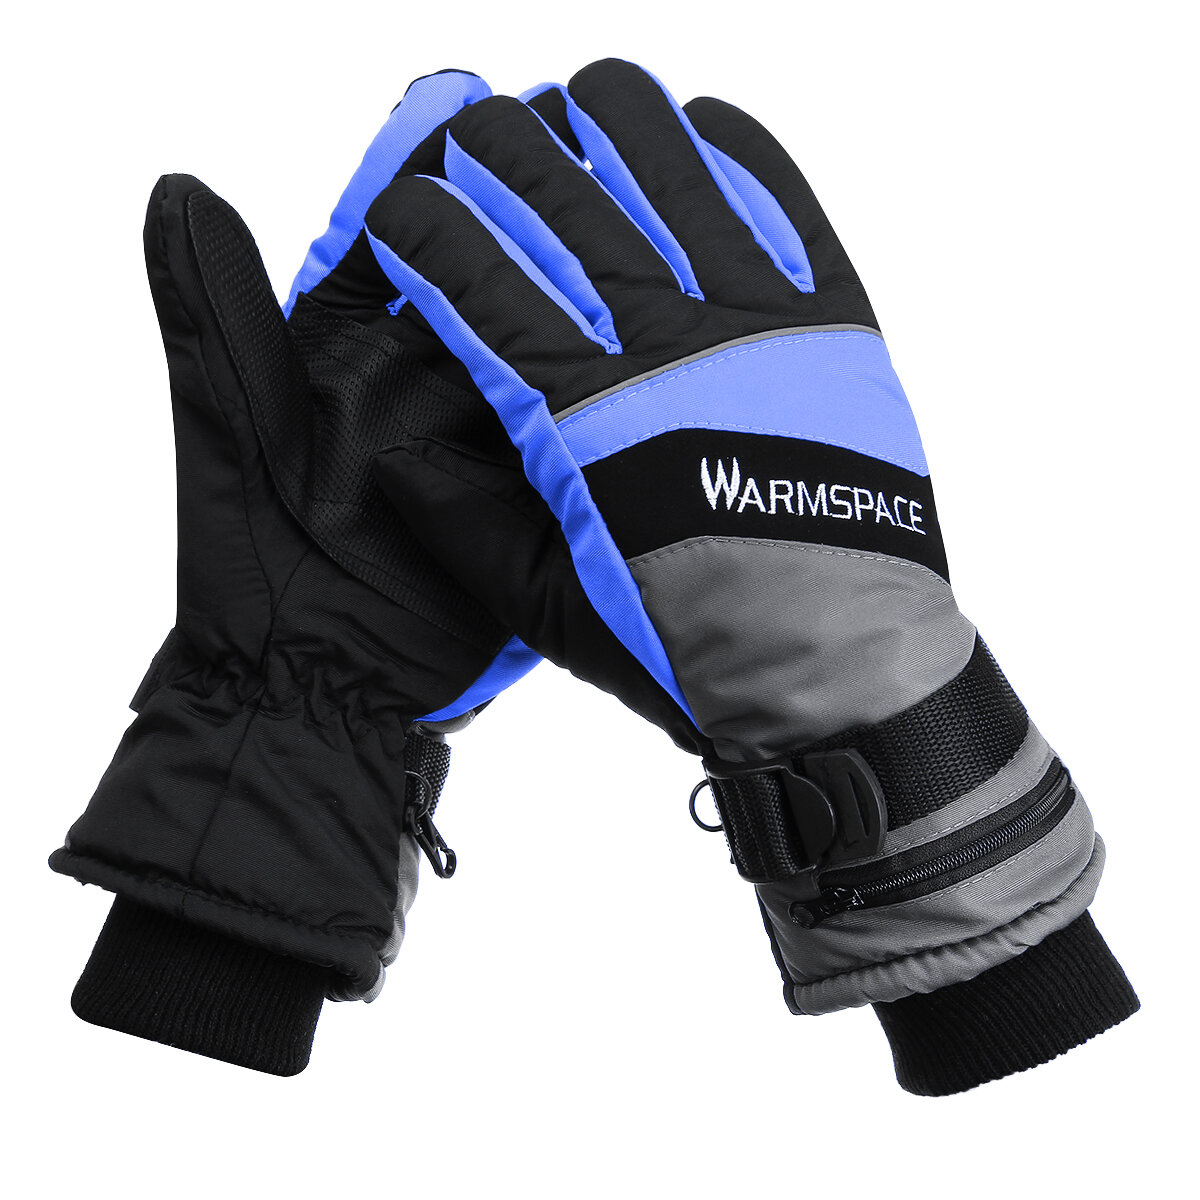 Image of WARMSPACE Battery Electric Heated Gloves Cycling Winter Warm Motorcycle Bike Riding